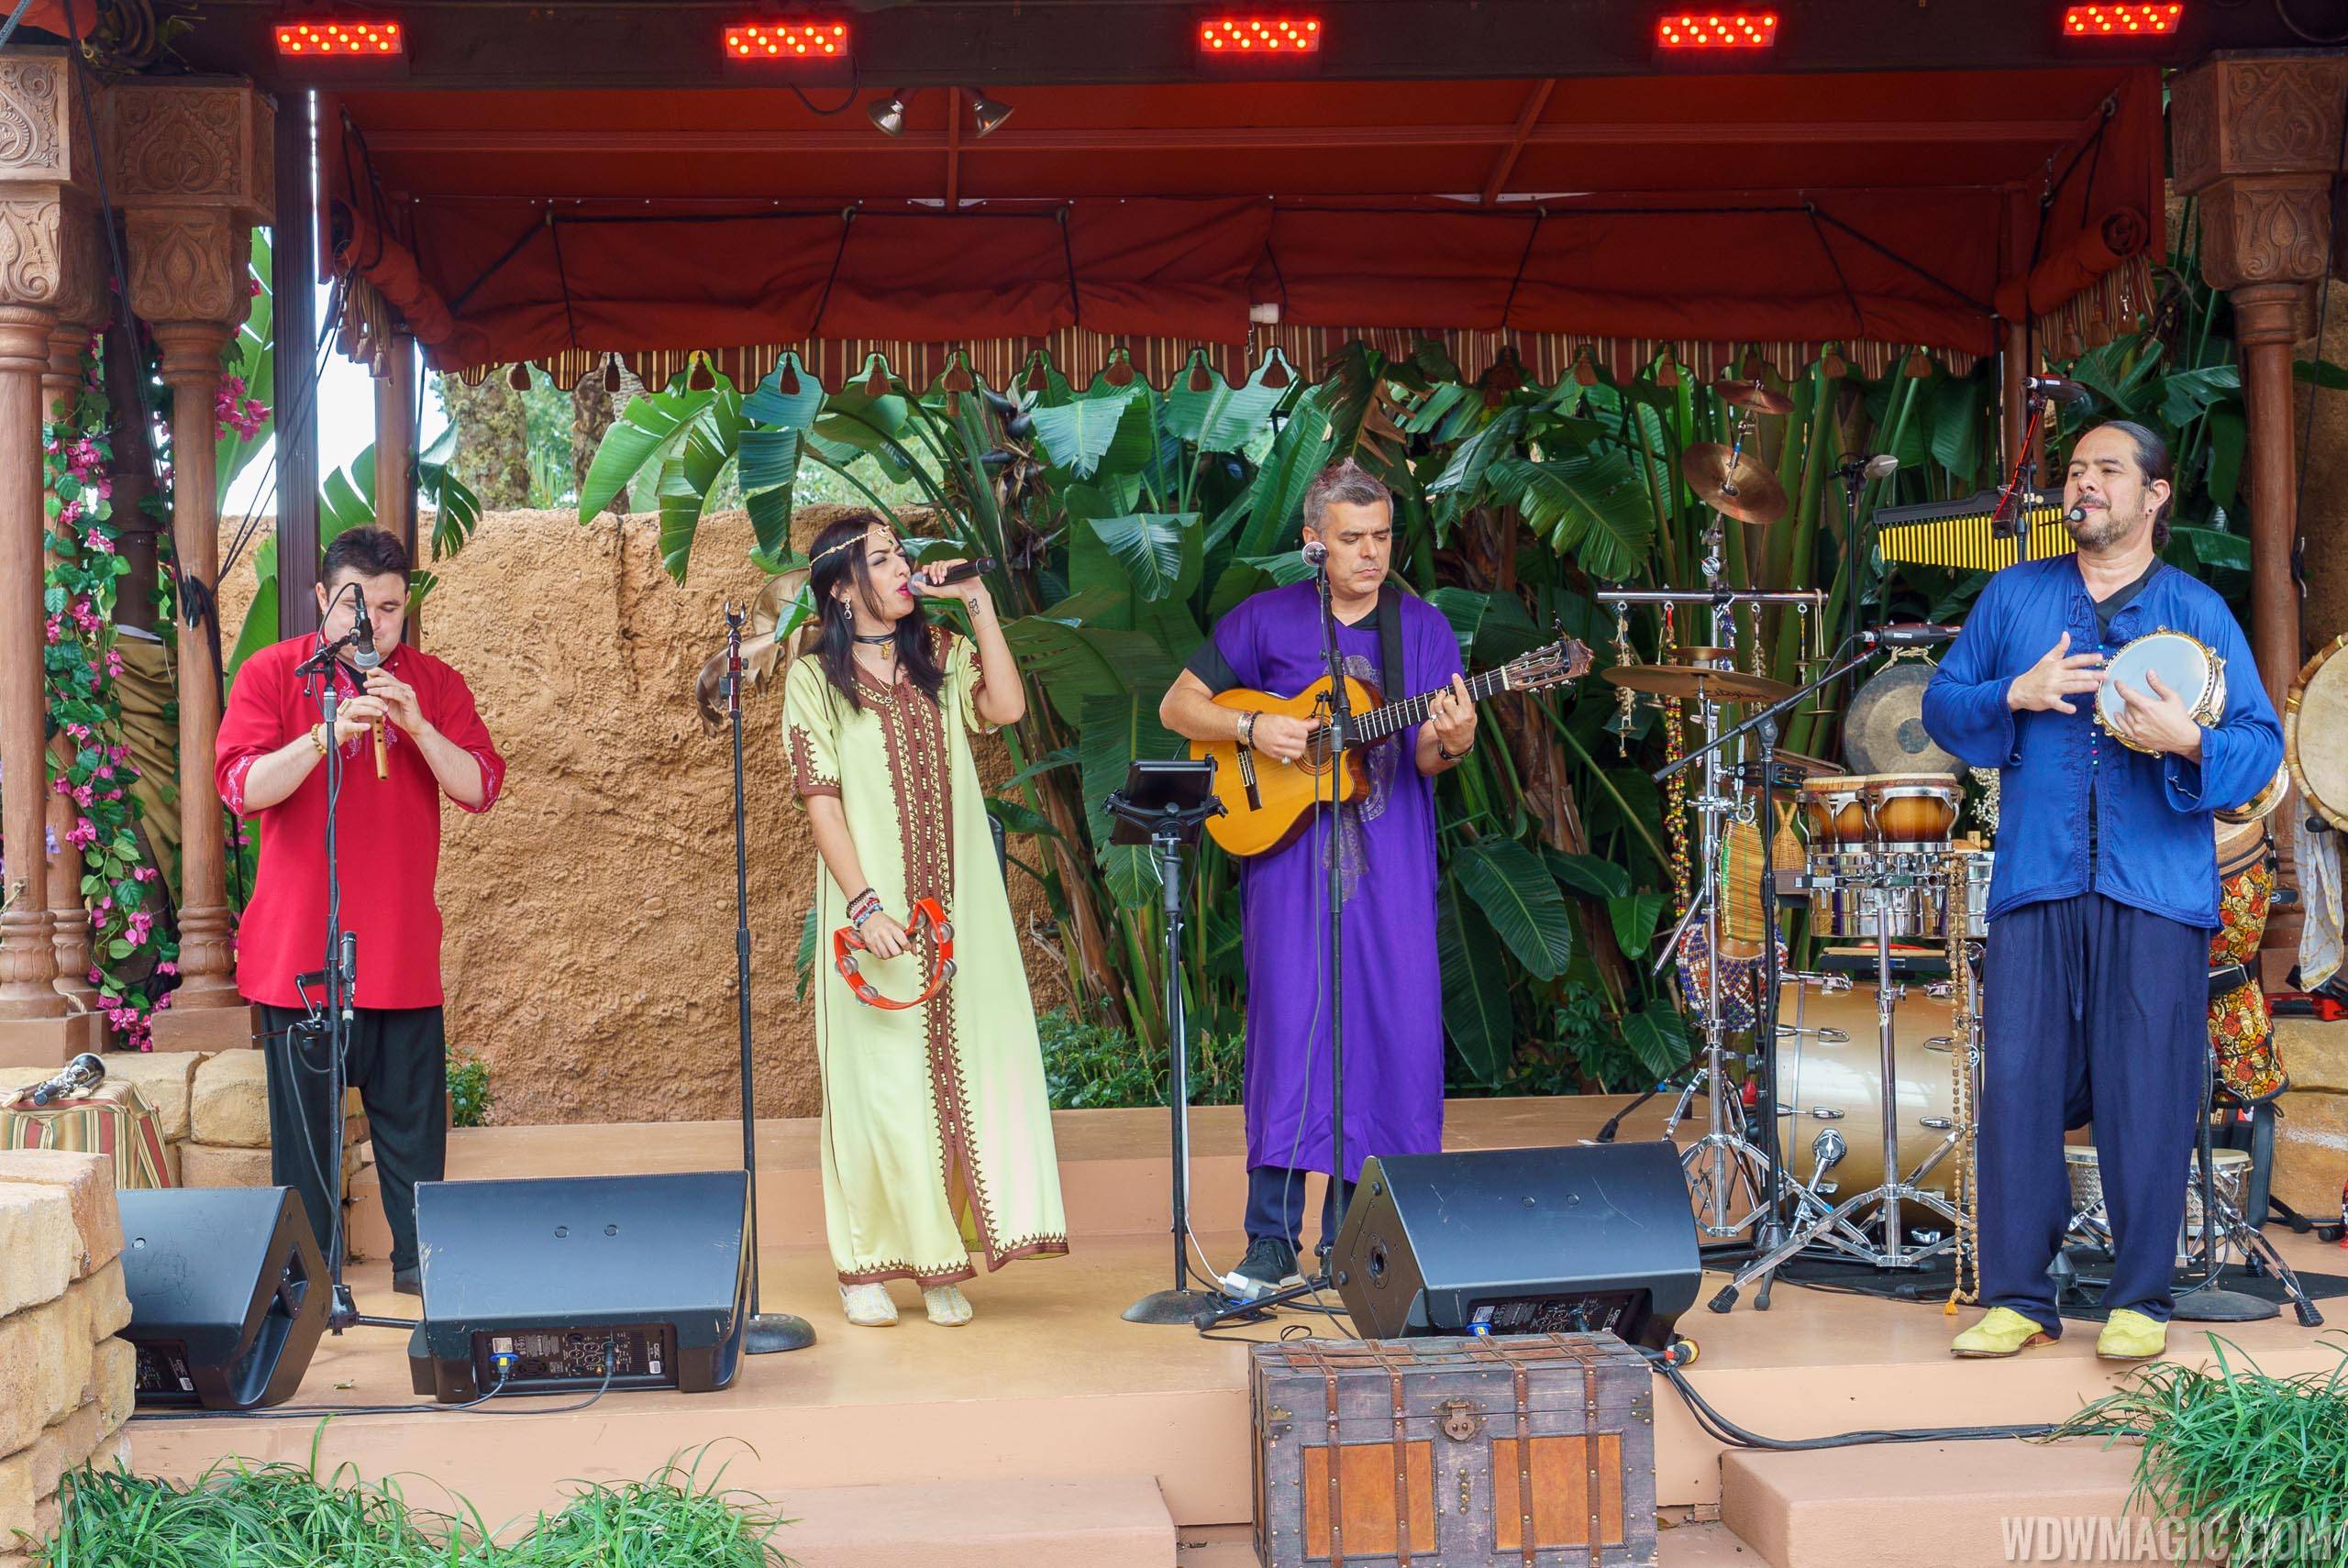 VIDEO - New act Matboukha Groove now playing at Epcot's Morocco Pavilion